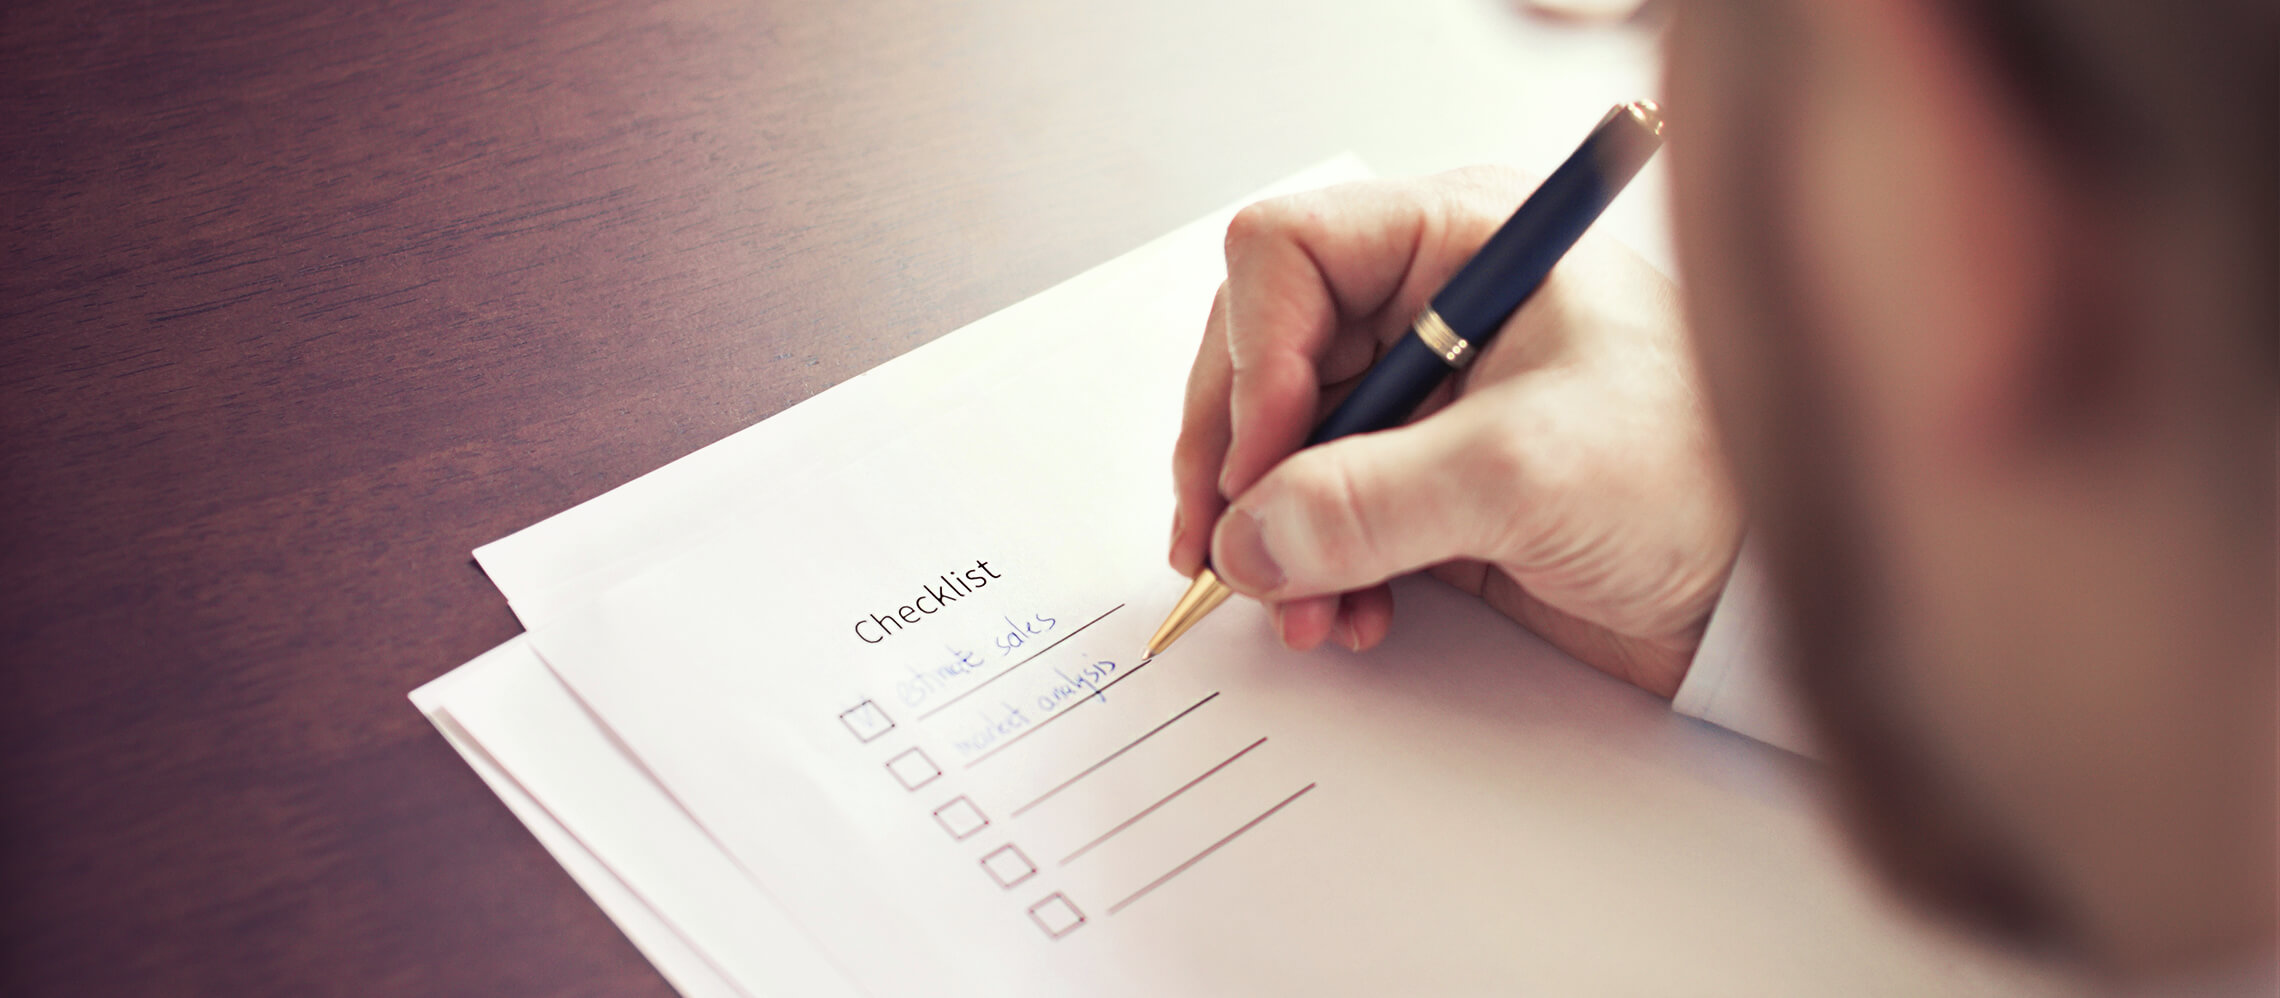 evaluate your presentation using the checklist